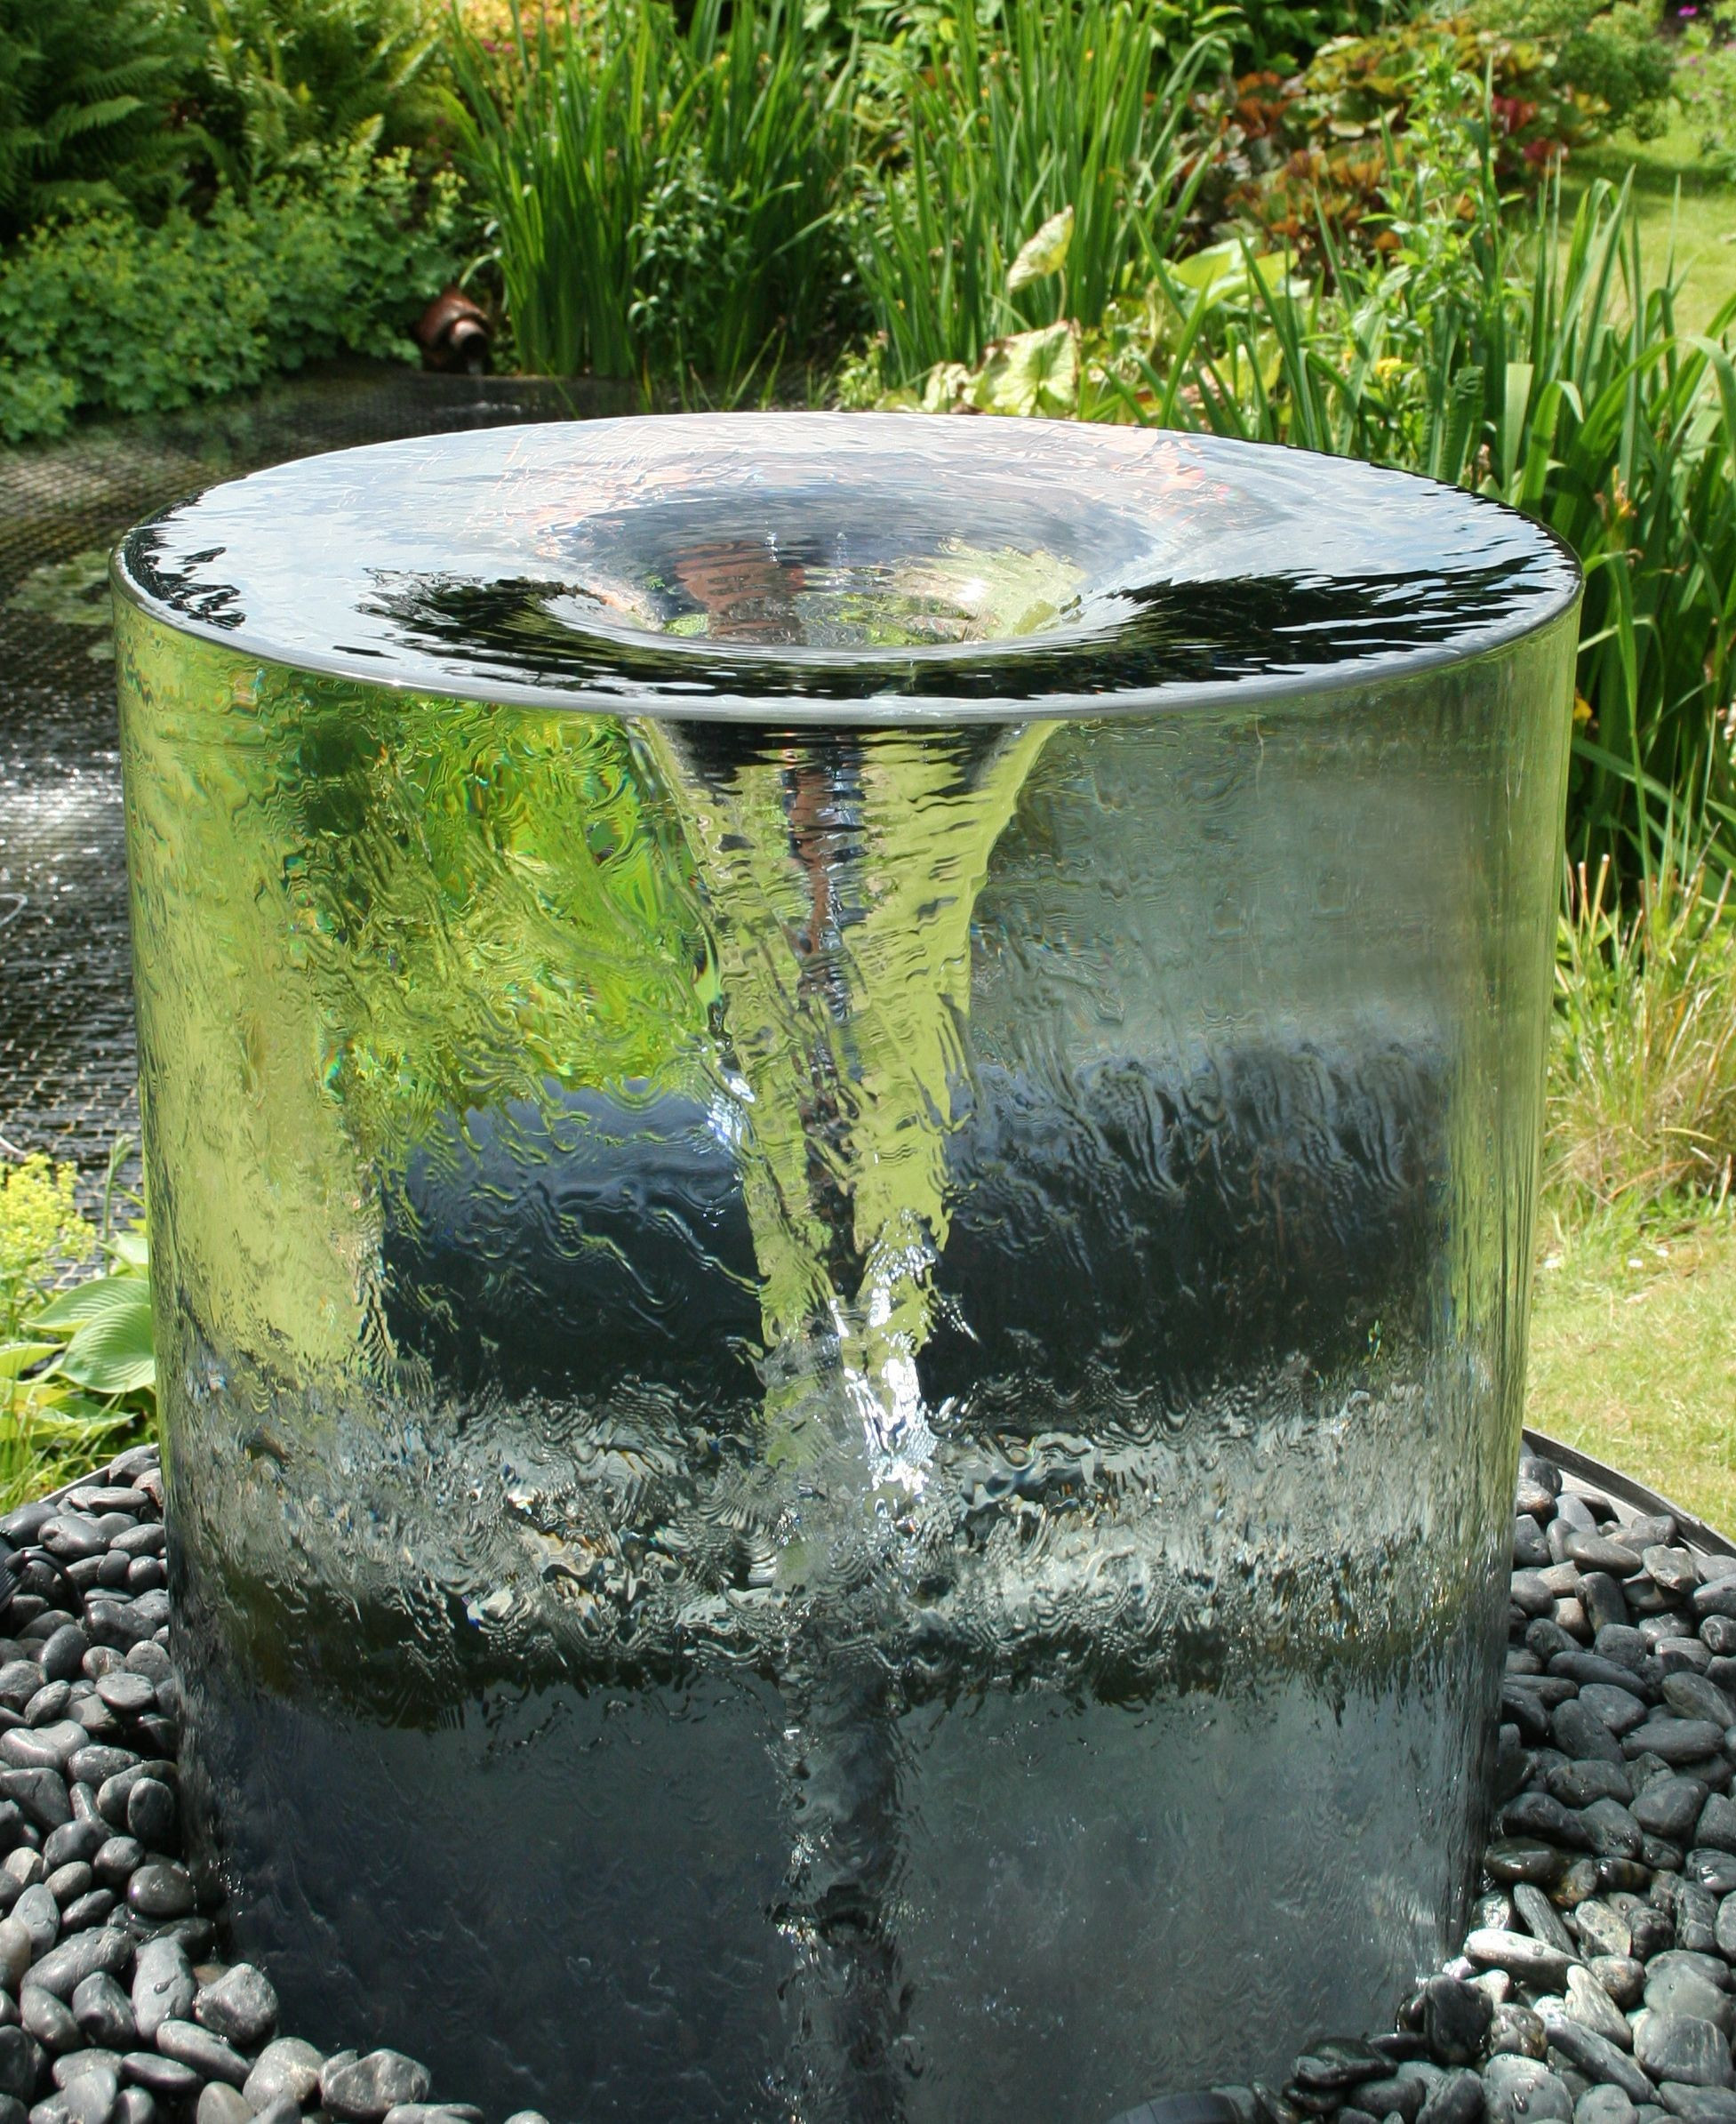 large vase water feature of stunning water display volute water feature by tills innovations regarding stunning water display volute water feature by tills innovations every garden needs a spectacular water feature